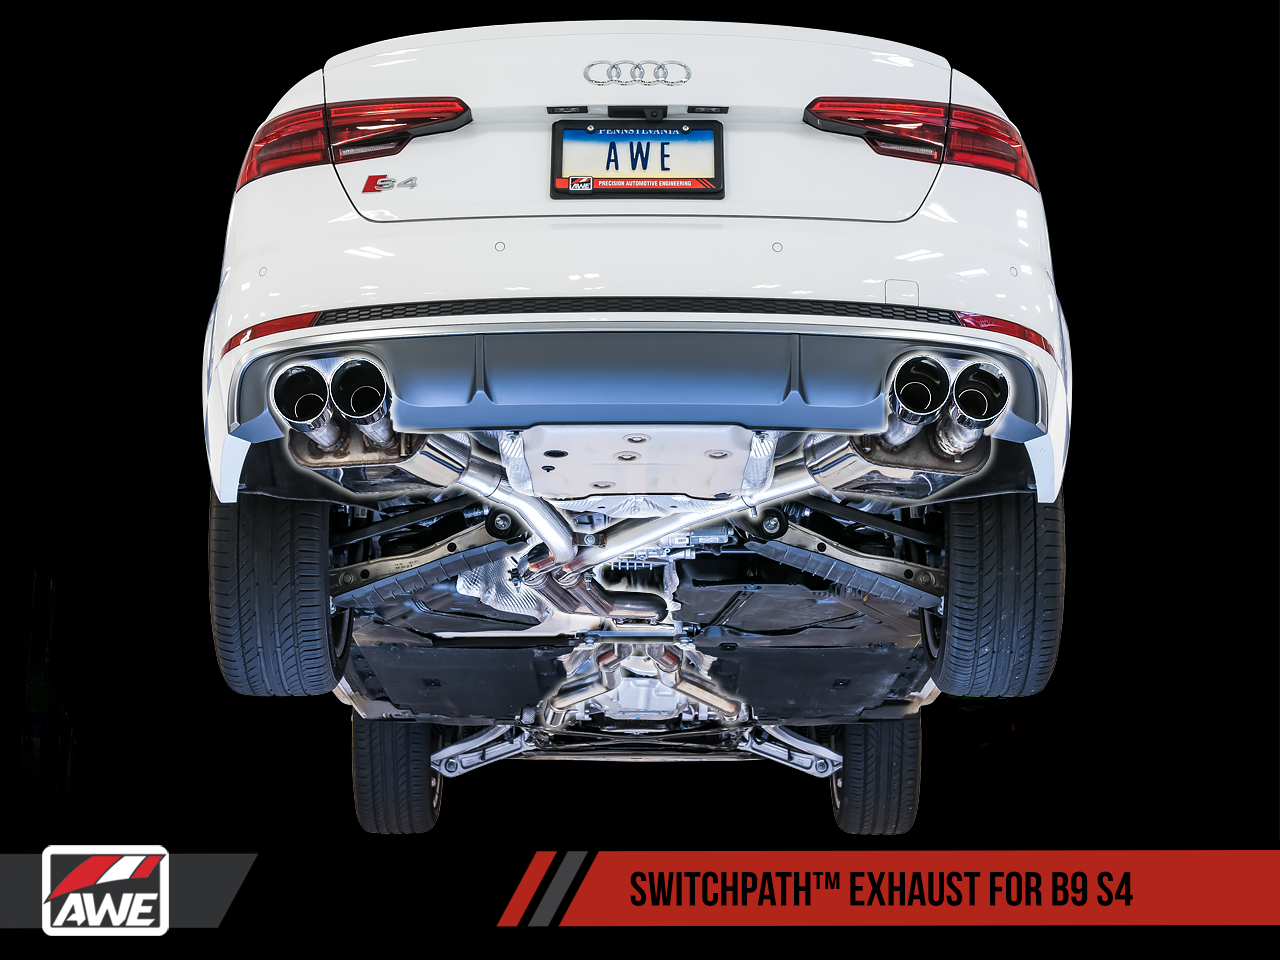 AWE Track Edition Exhaust for Audi B9 S4 - Non-Resonated - Motorsports LA